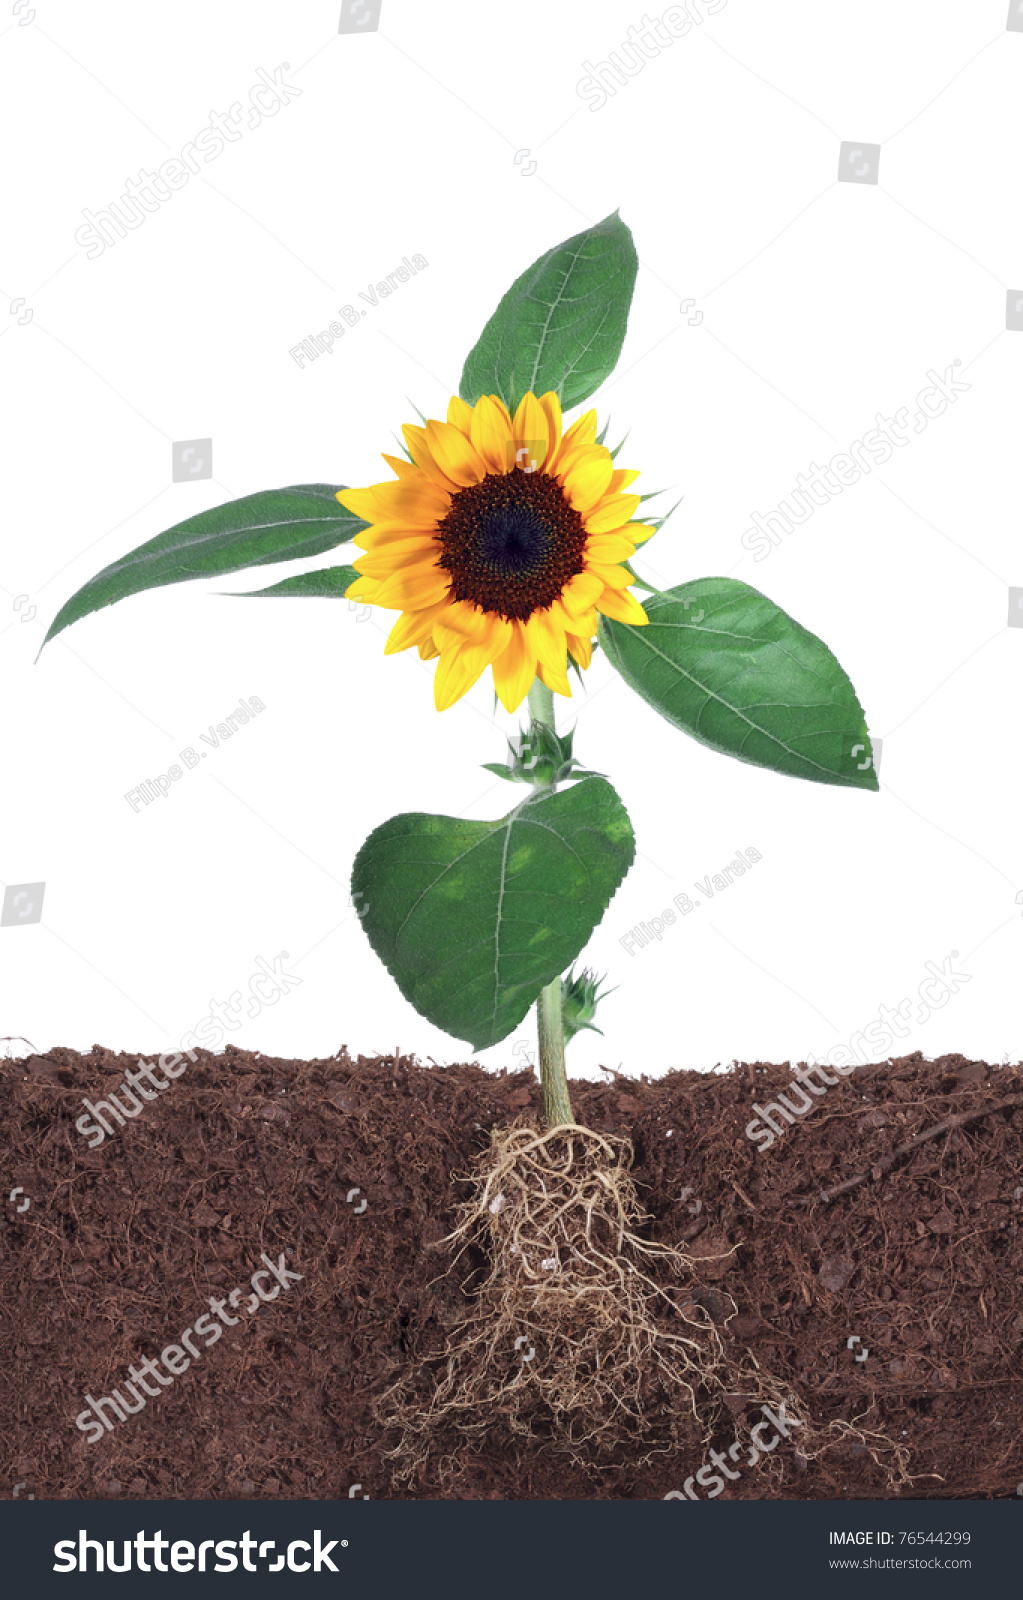 Sunflower Root Isolated On White Stock Photo 76544299 ...